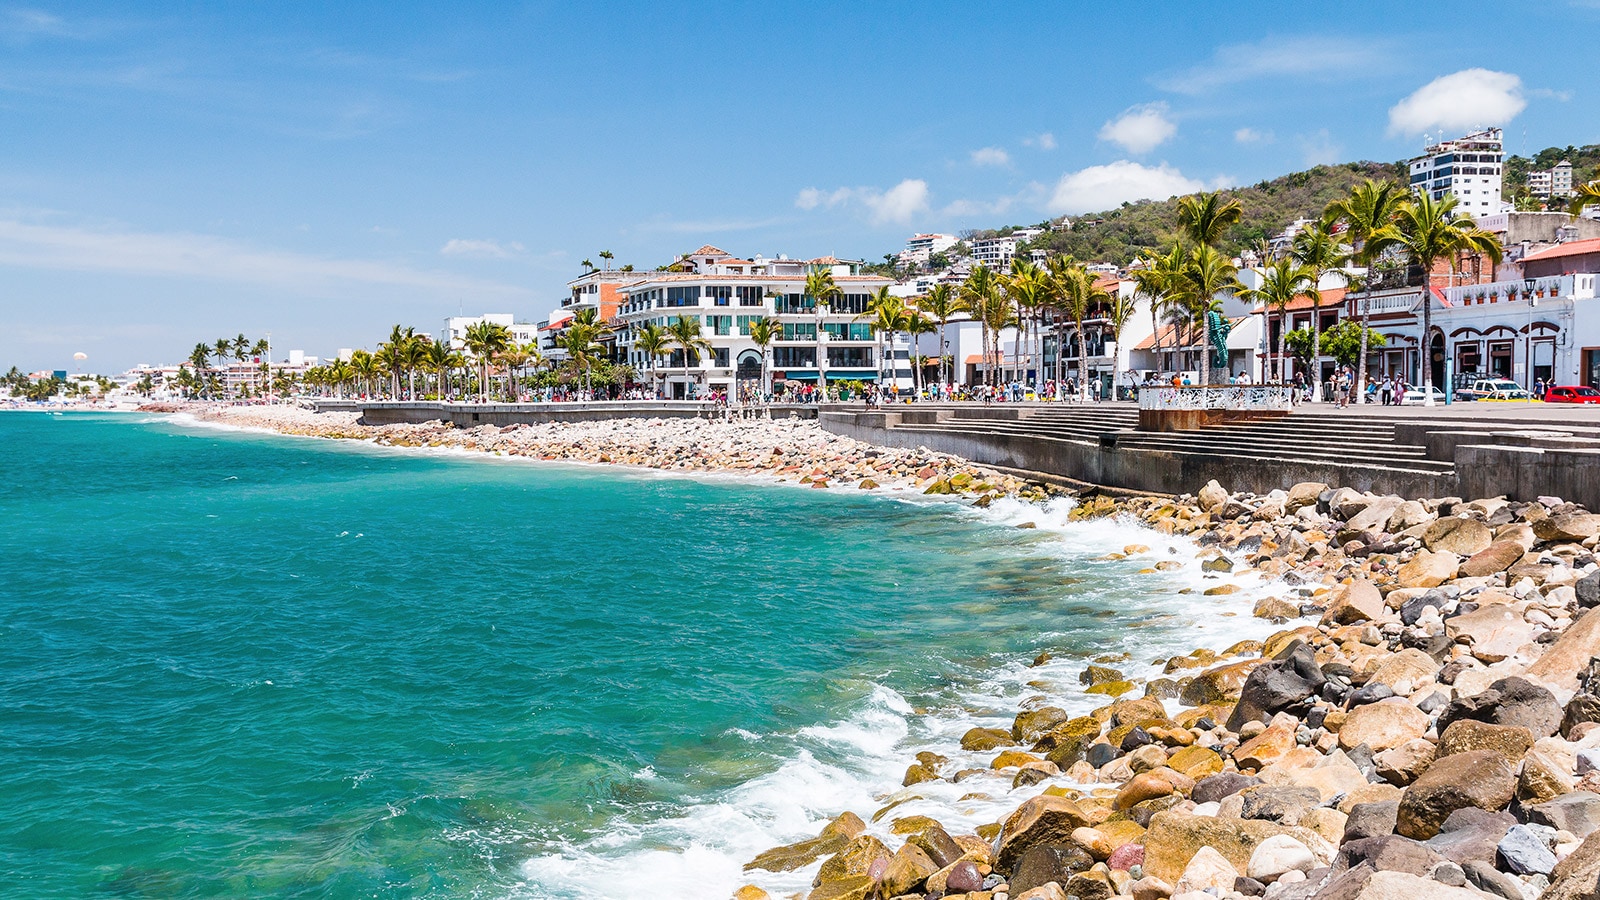 7 day mexican riviera cruise from long beach